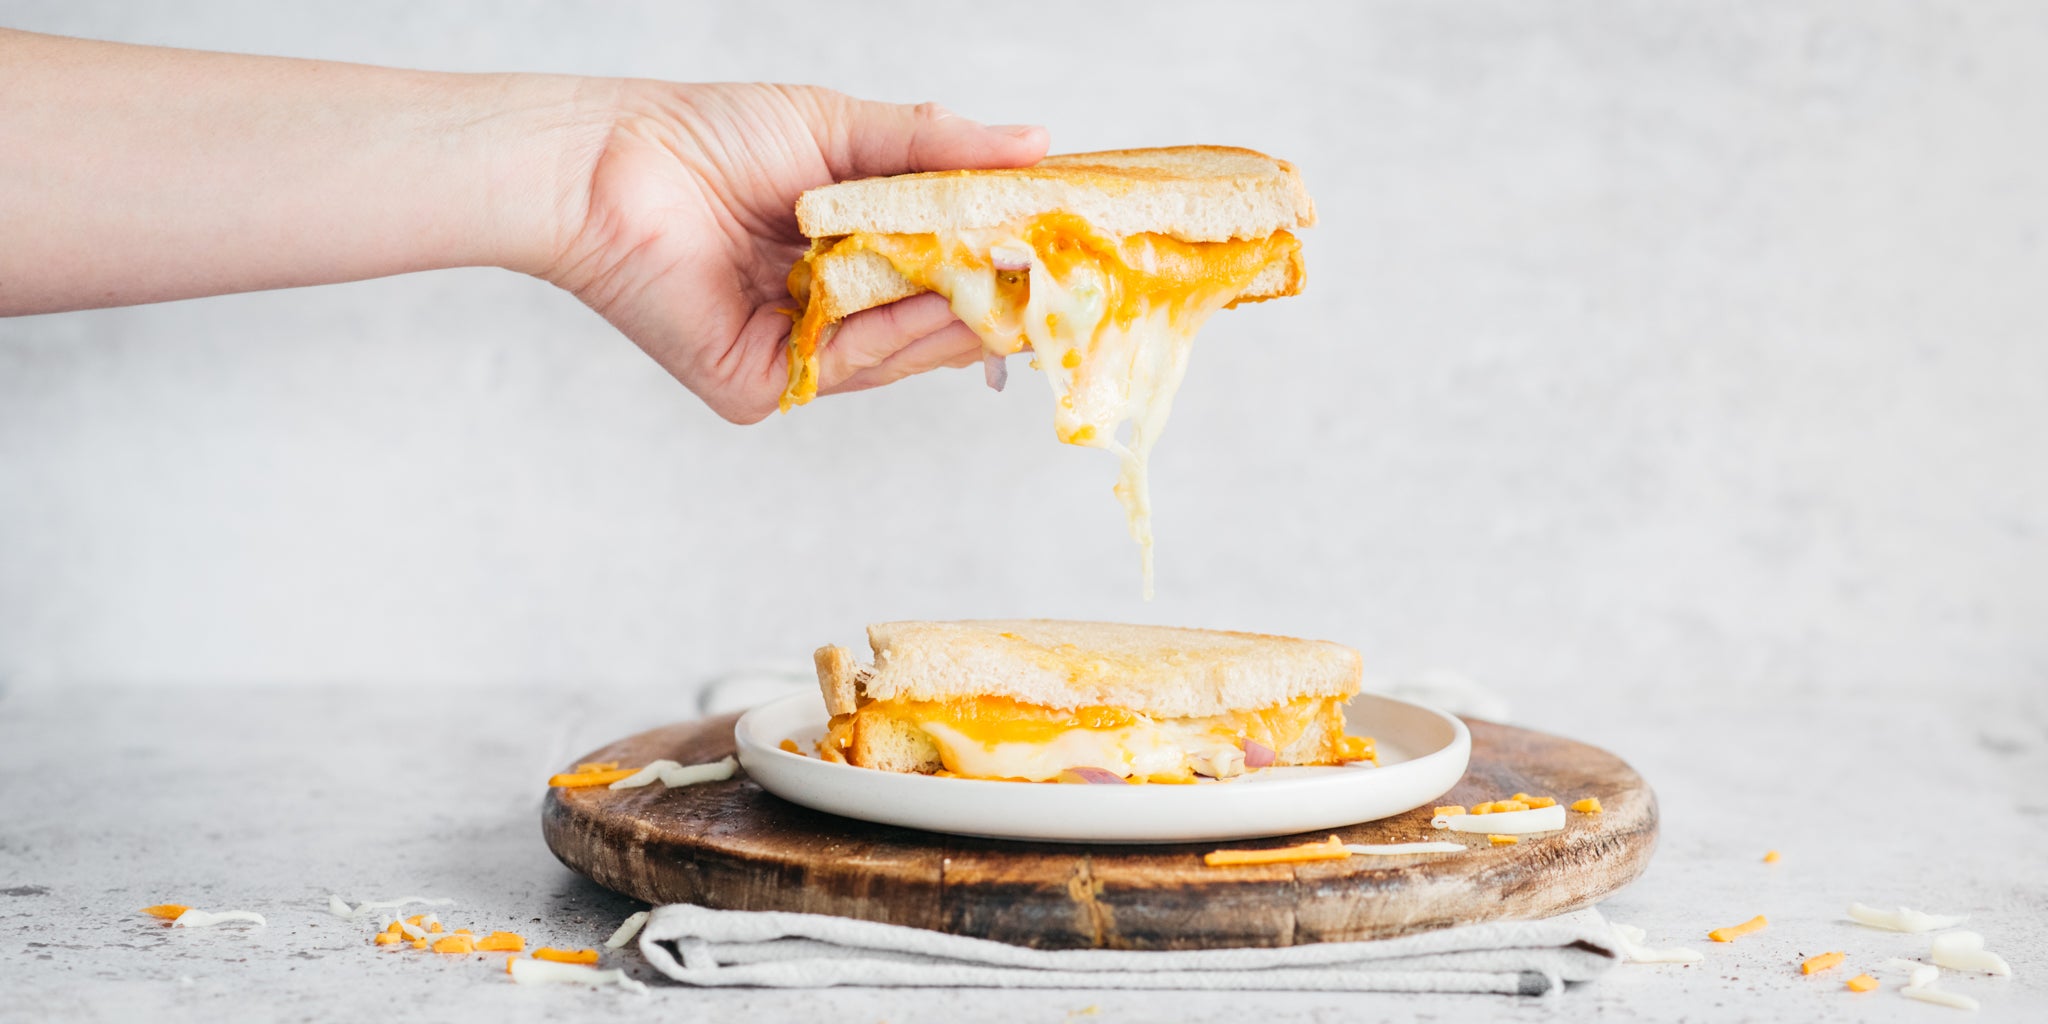 Hand lifting a fried egg and cheese sandwich made with white bread